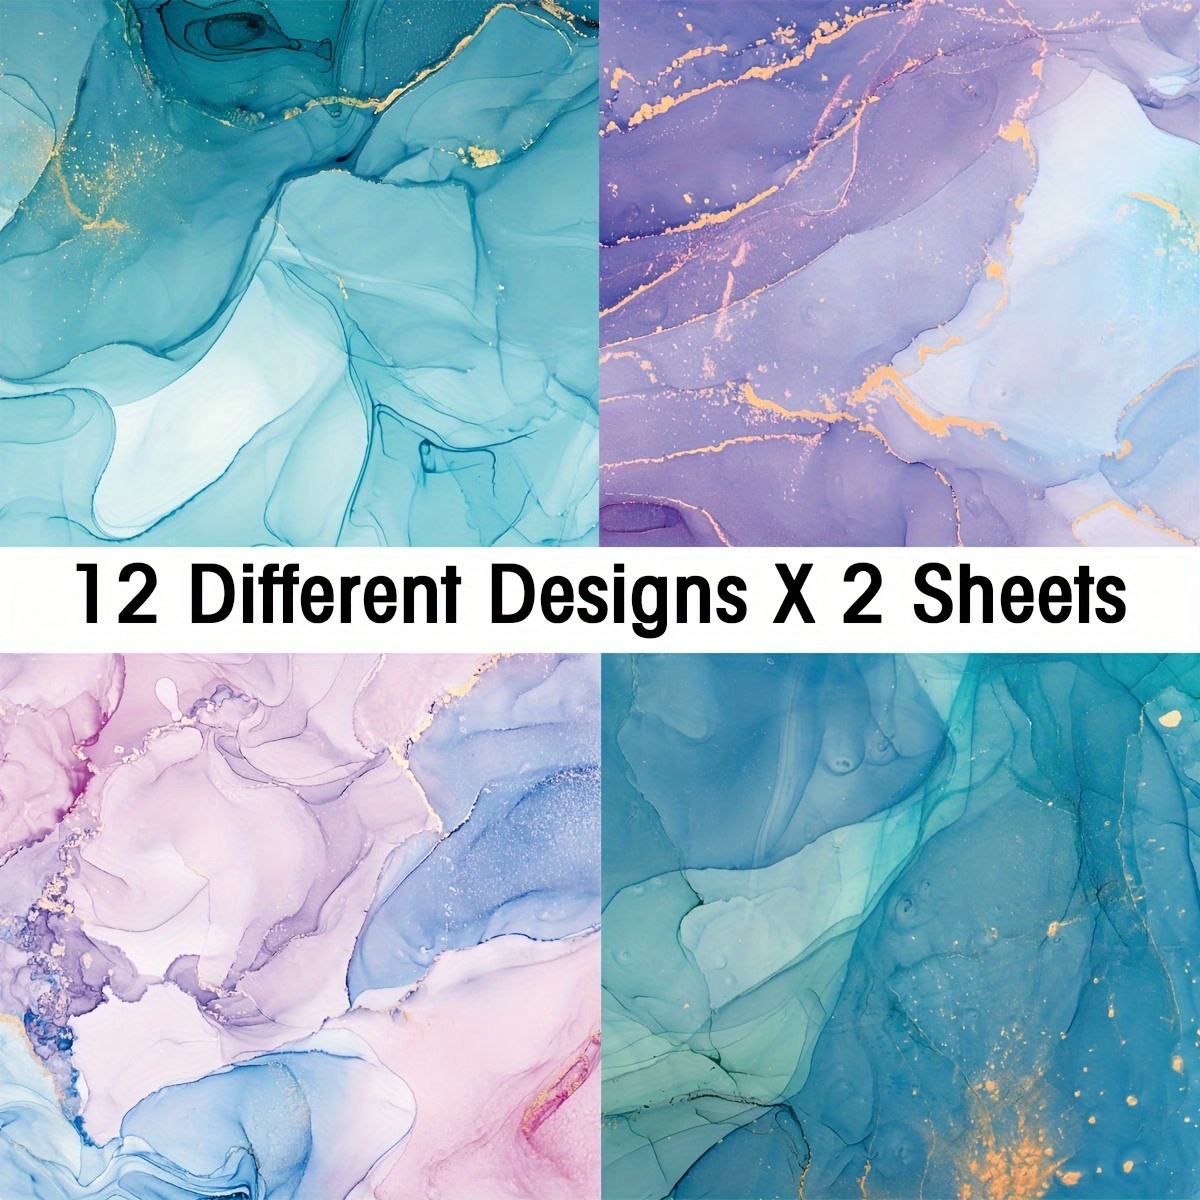 12 Sheets 6X6 Alcohol Ink Paper Mixture Scrapbookking Patterned Journal  Paper Pack Handmade Craft Paper Background Pad Card